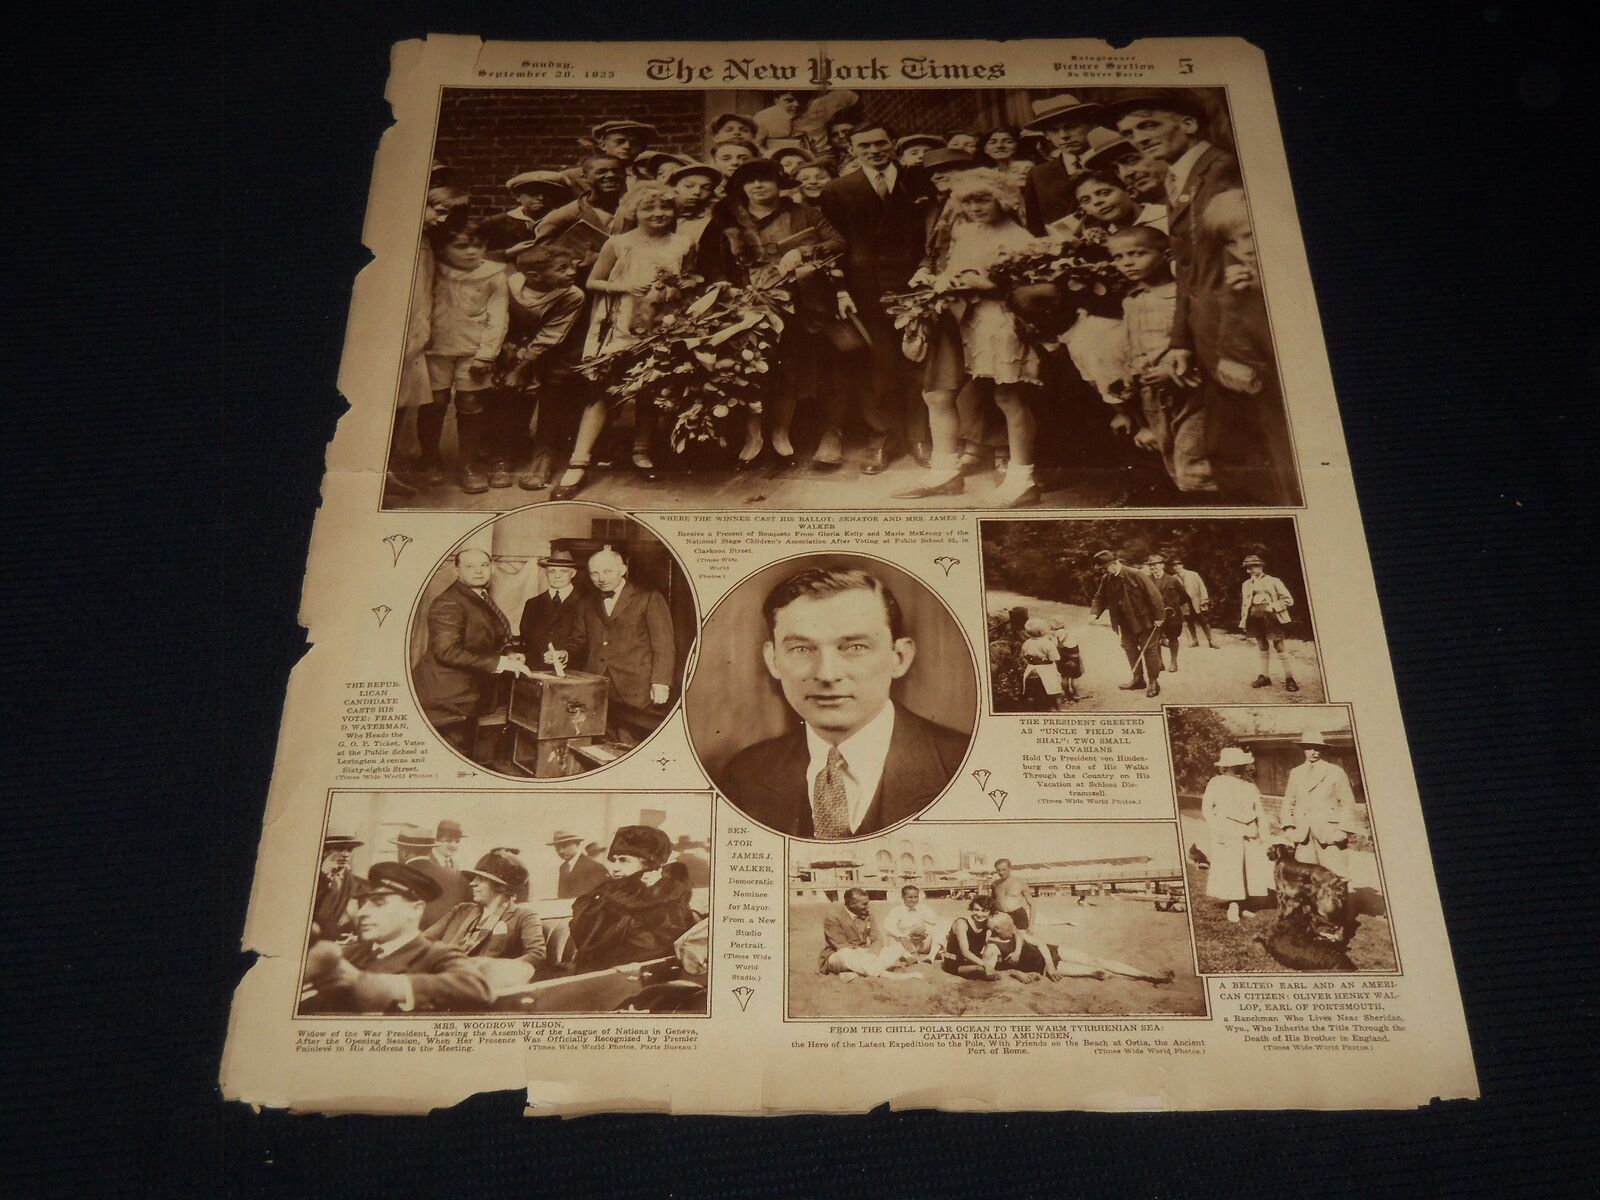 1925 SEPTEMBER 20 NOV NEW YORK TIMES PICTURE SECTION - JIMMIE WALKER - NT 9491